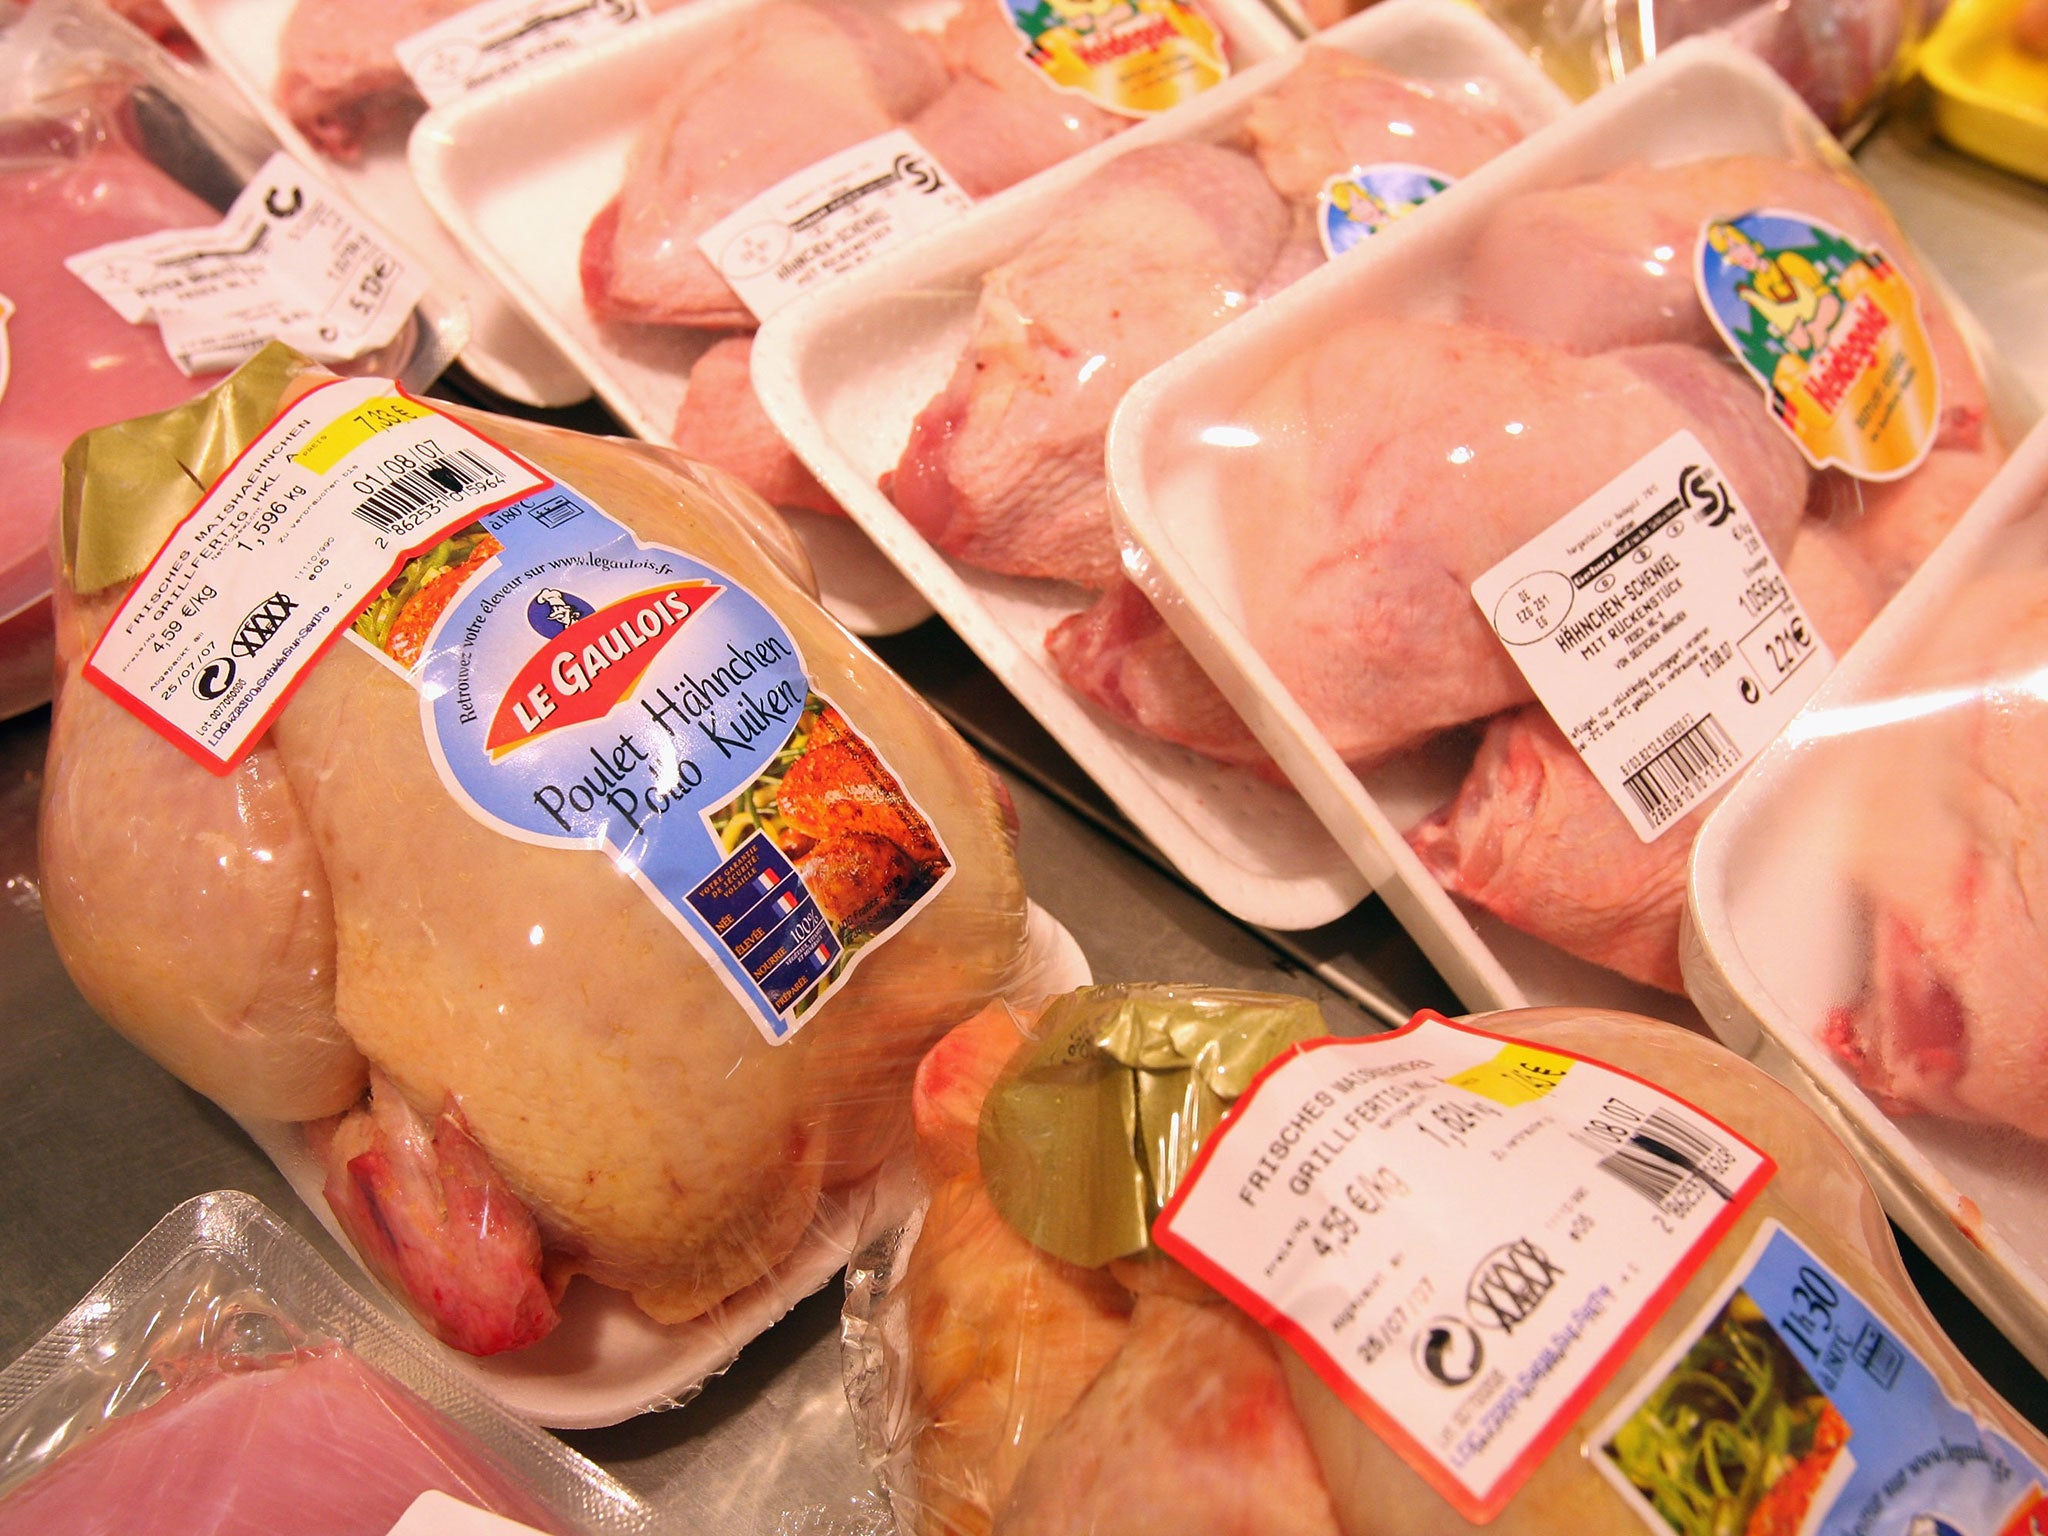 Scientists are calling on the Government to fund a vaccine for campylobacter after nearly three-quarters of the fresh chickens in supermarkets and butchers were found to be contaminated with the potentially lethal food-poisoning bug